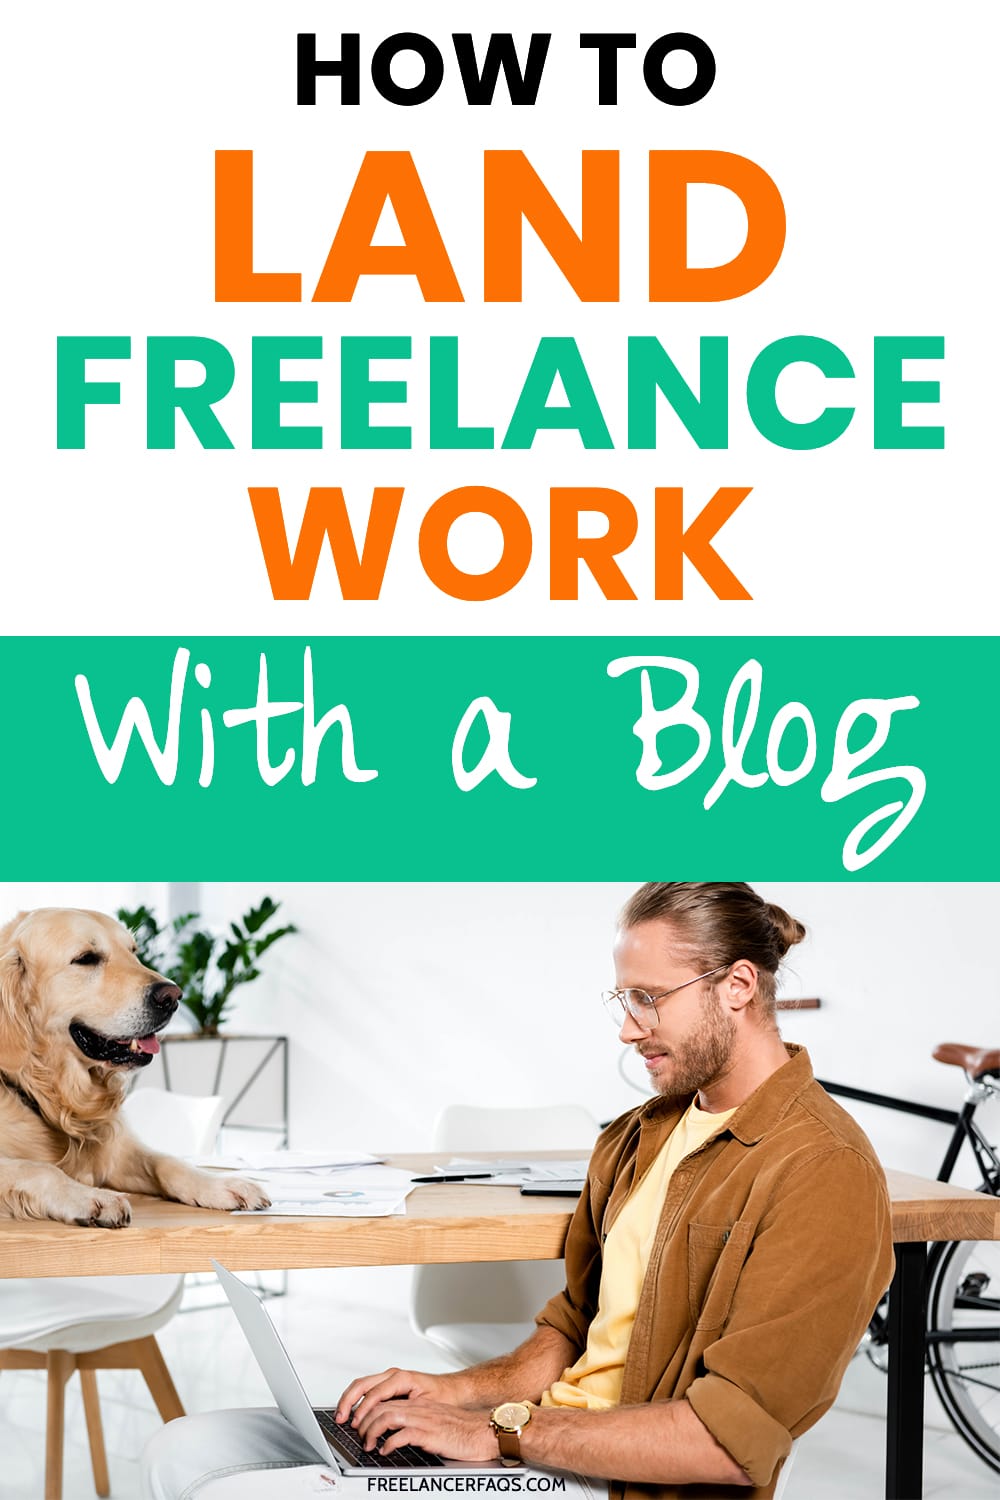 How Do You Land Freelance Work from Home with a Blog? - Freelancer FAQs